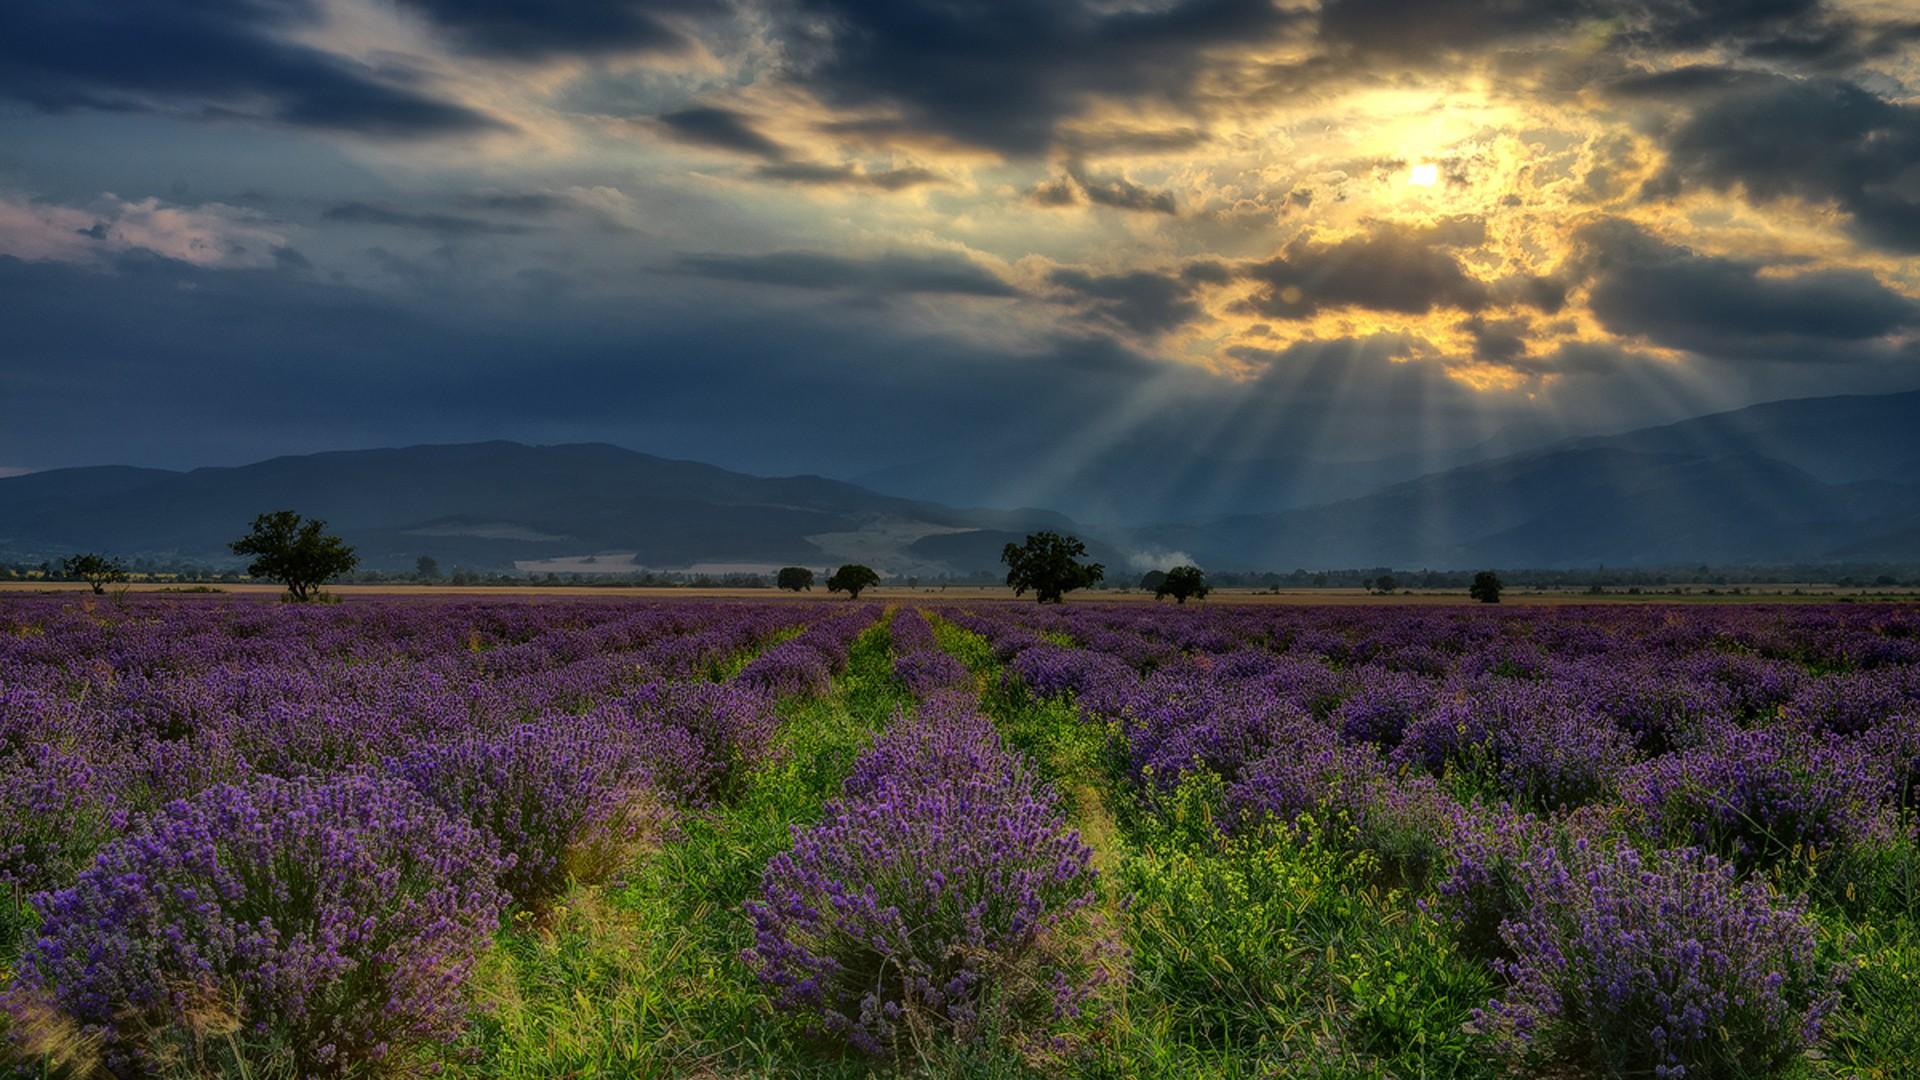 #field, #trees, #clouds, #sun rays, #nature, #lavender